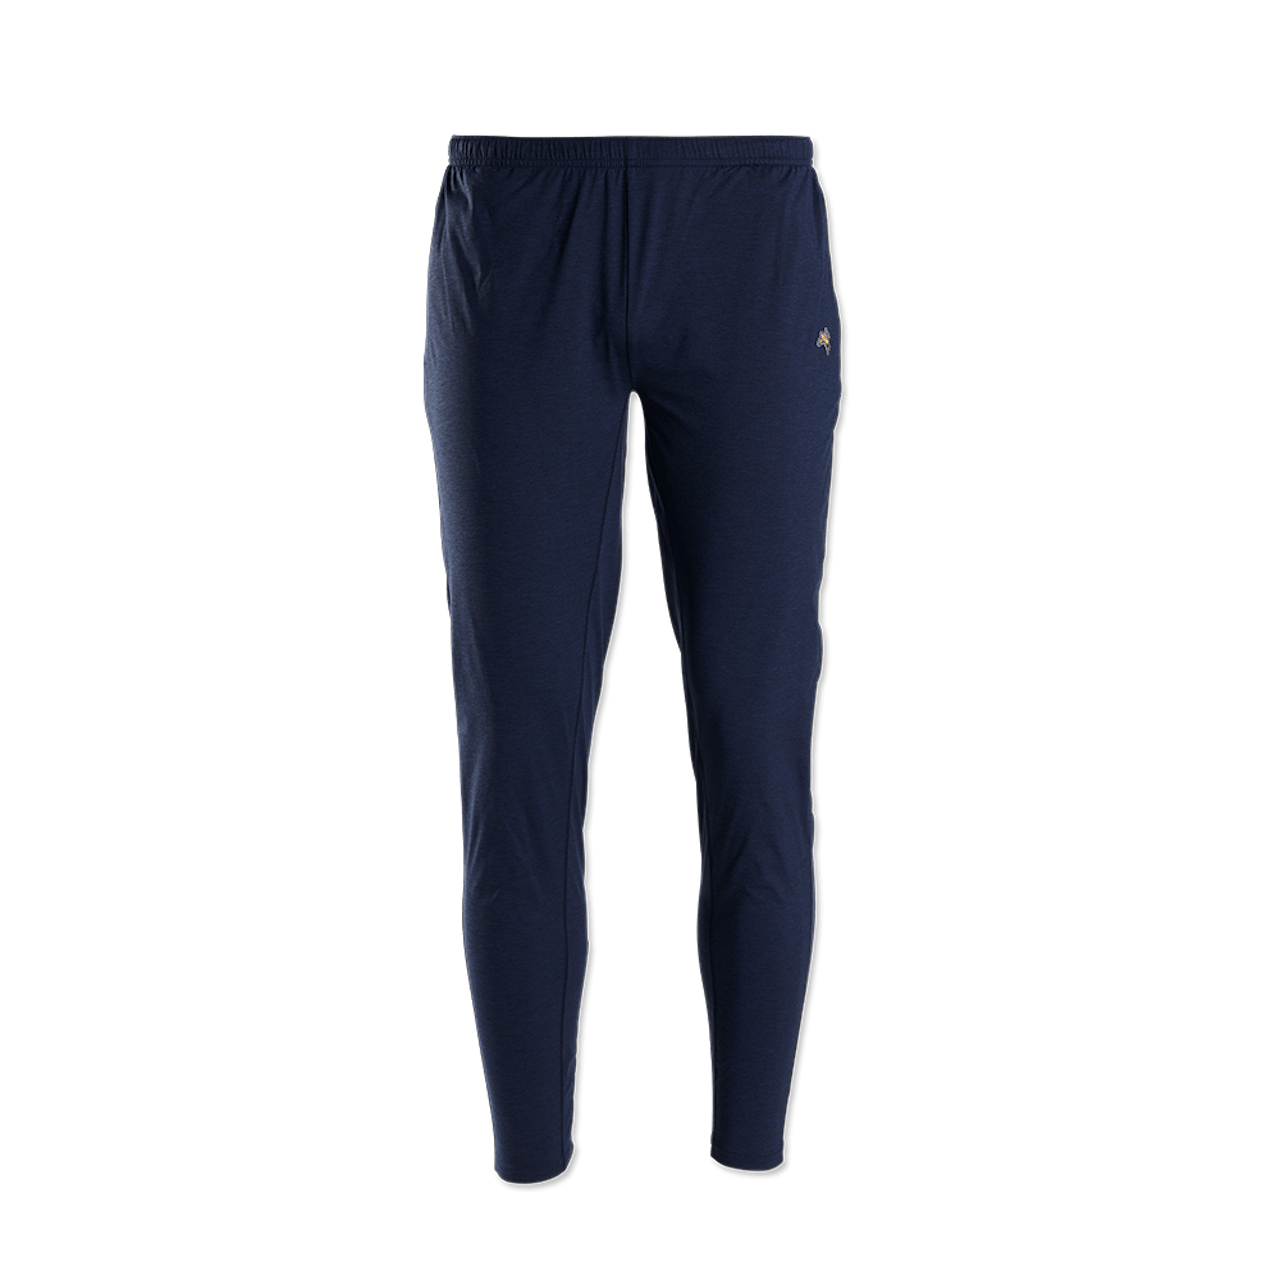 Men's Athletic Tights & Performance Shorts